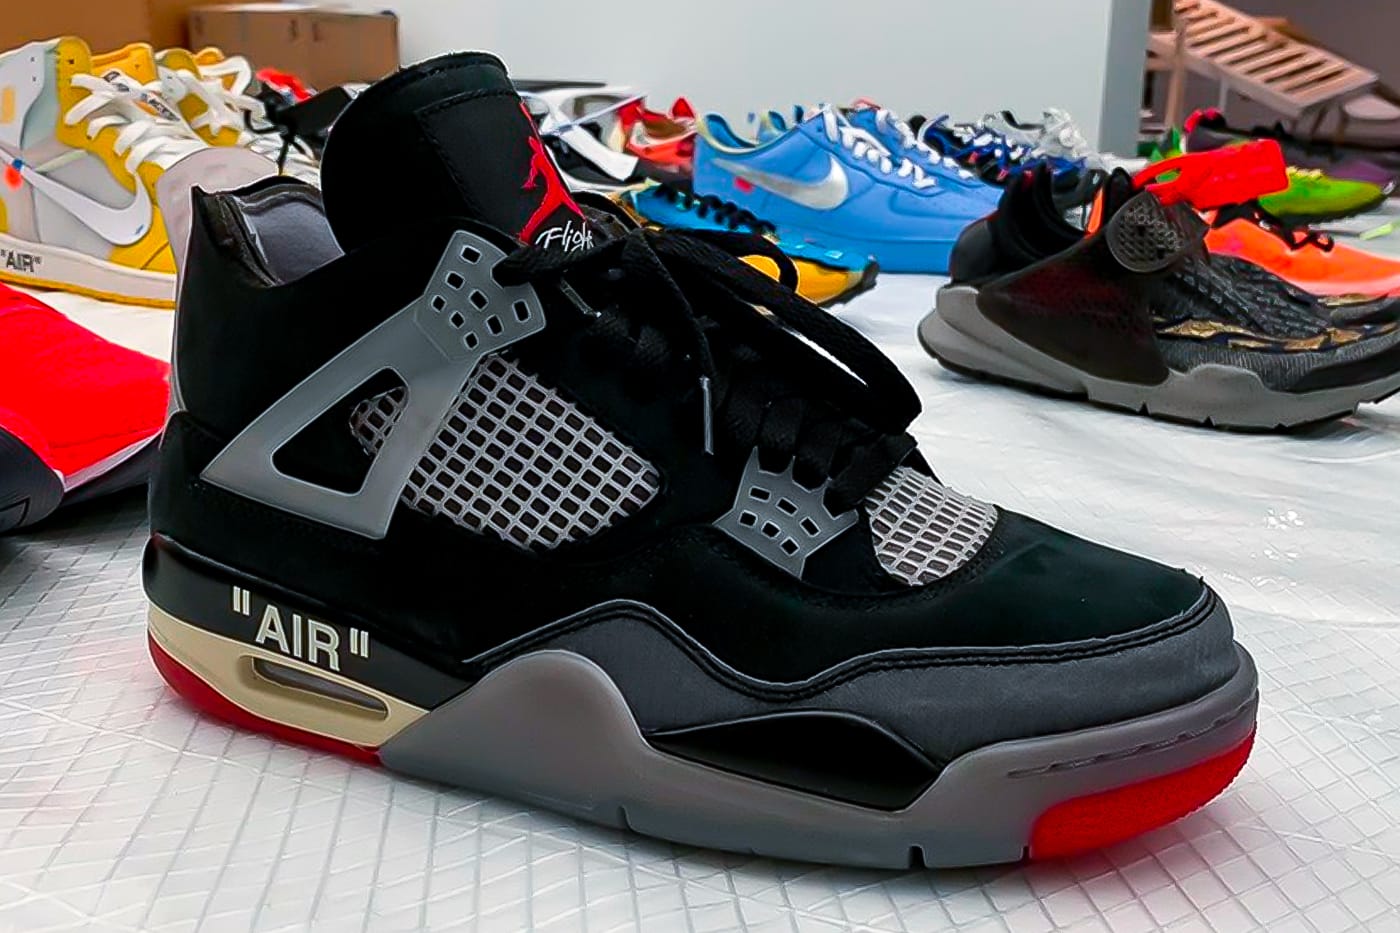 how much are jordan 4 off white